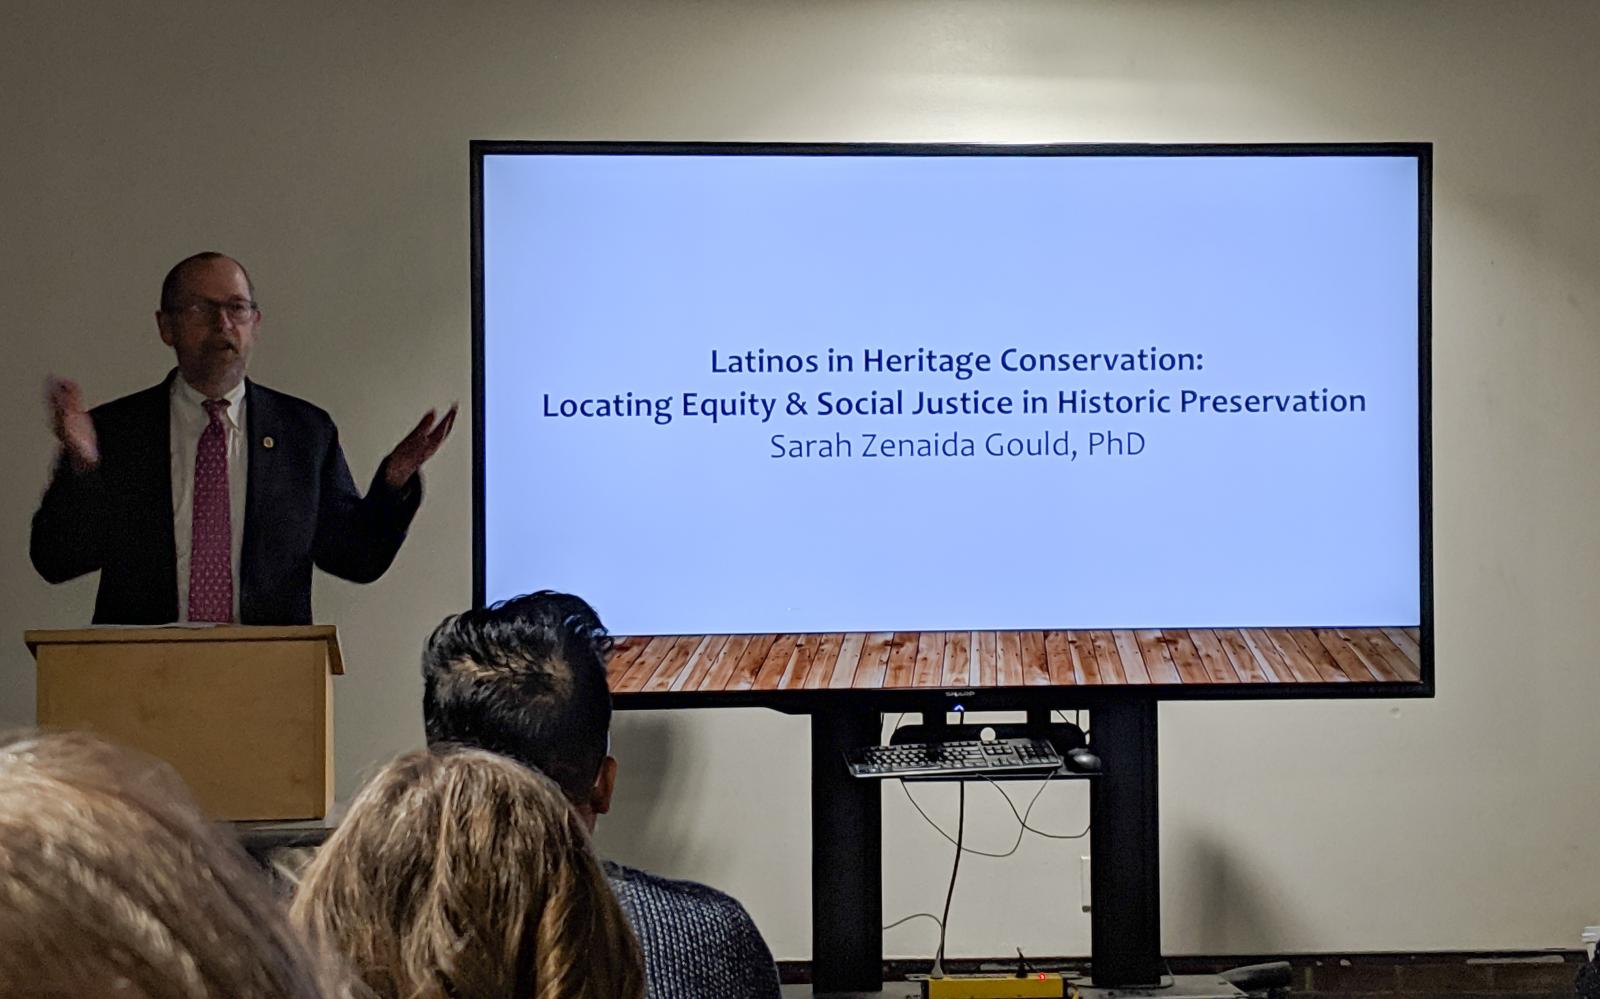 Lecture: Latinos in Heritage Conservation: Locating Equity & Social Justice in Historic Preservation